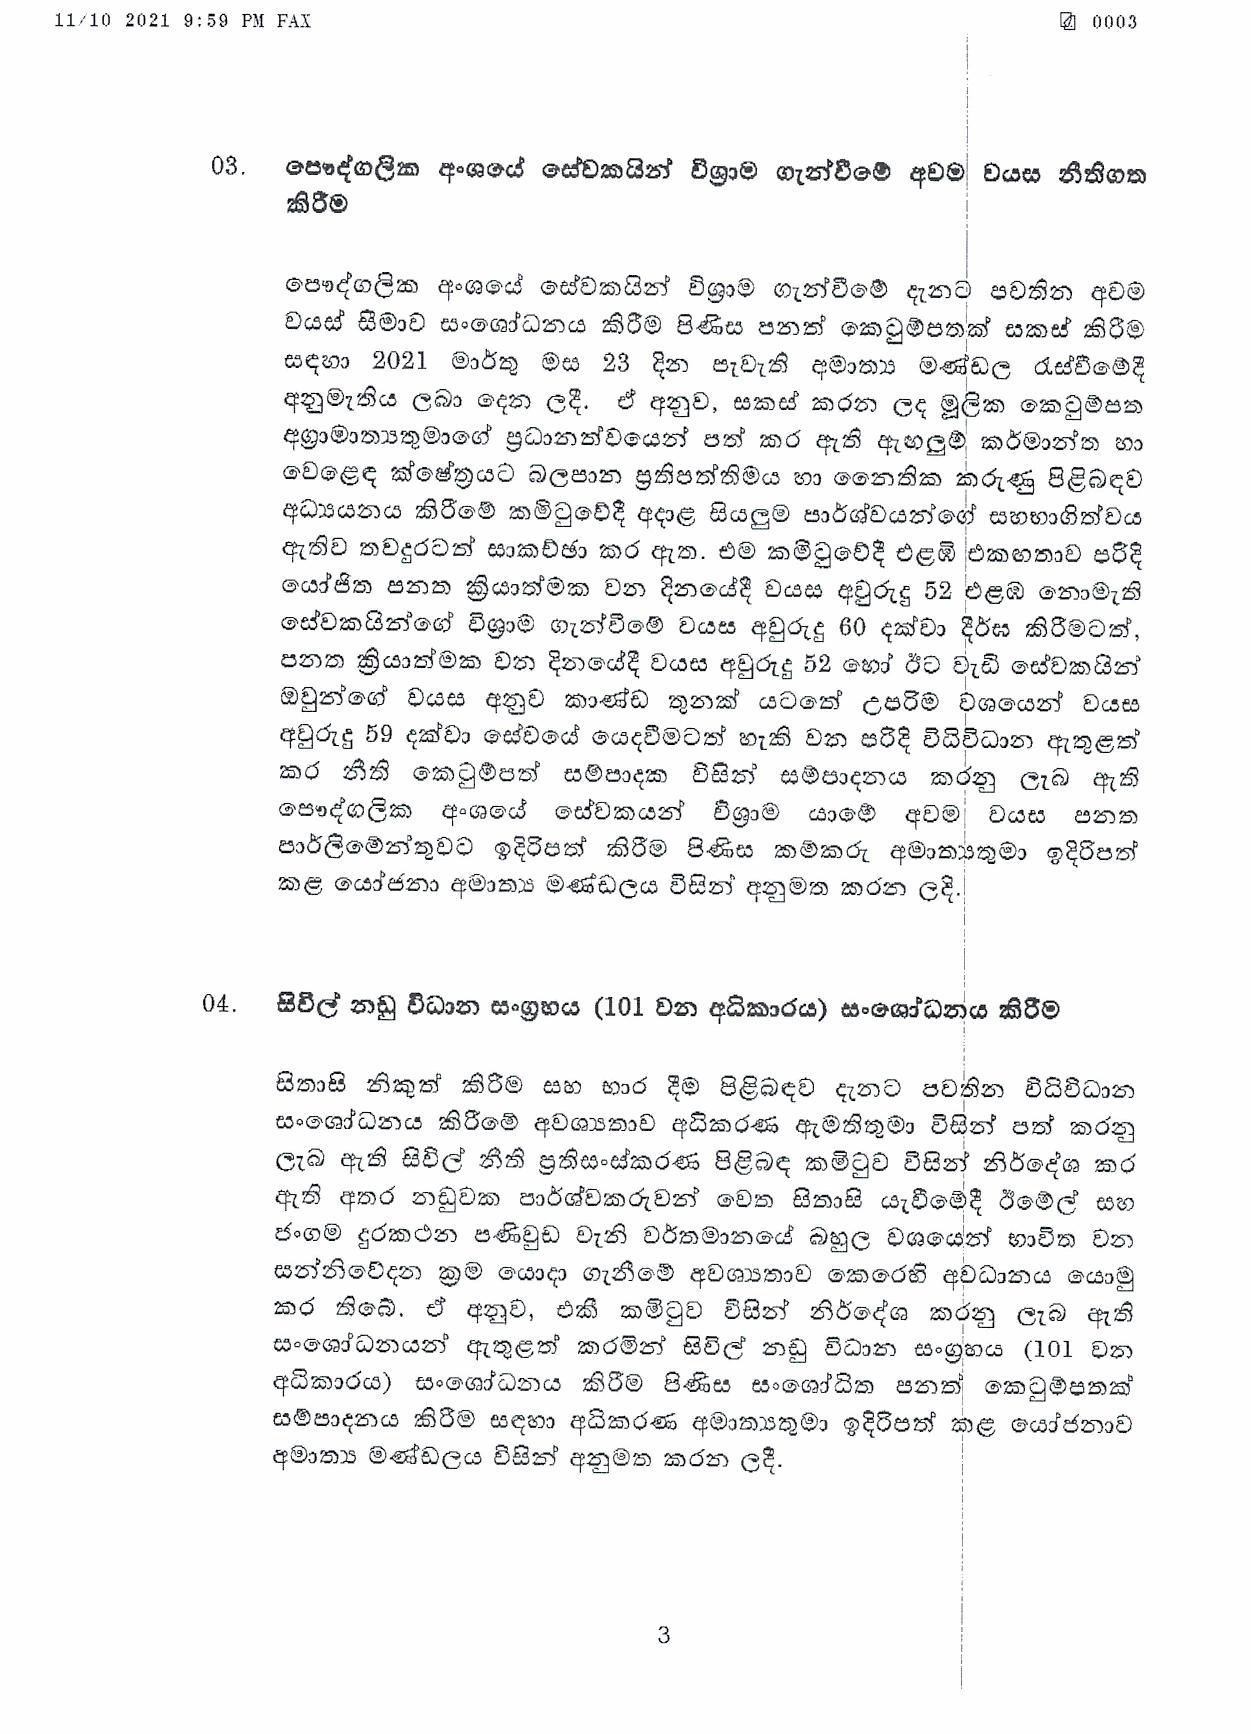 Cabinet Decisions on 11.10.2021 page 003